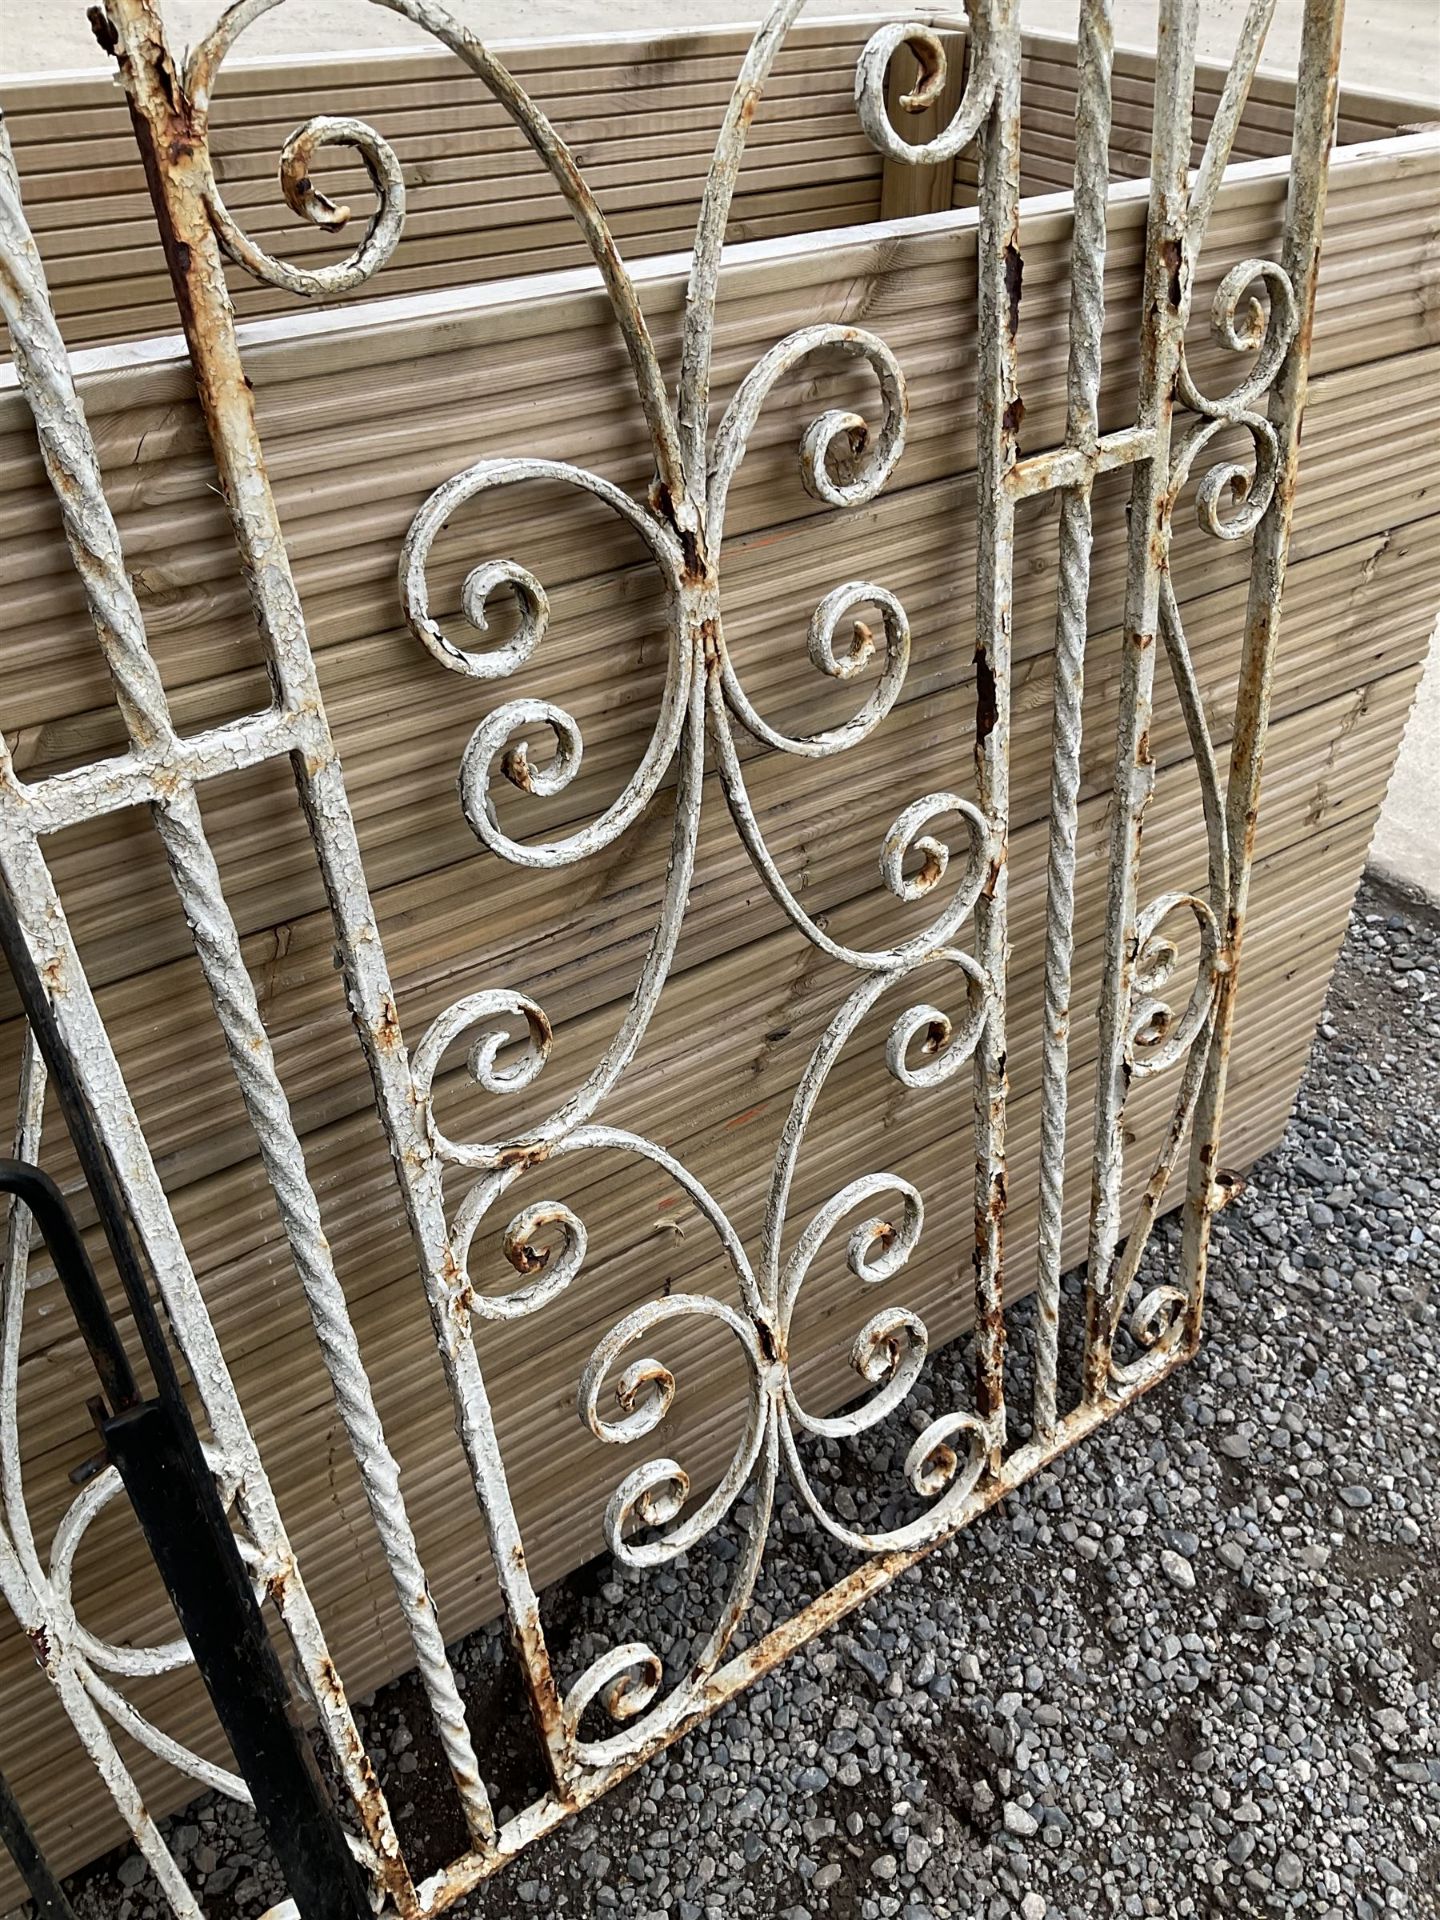 Two wrought iron garden gates painted in black and white - Image 6 of 6